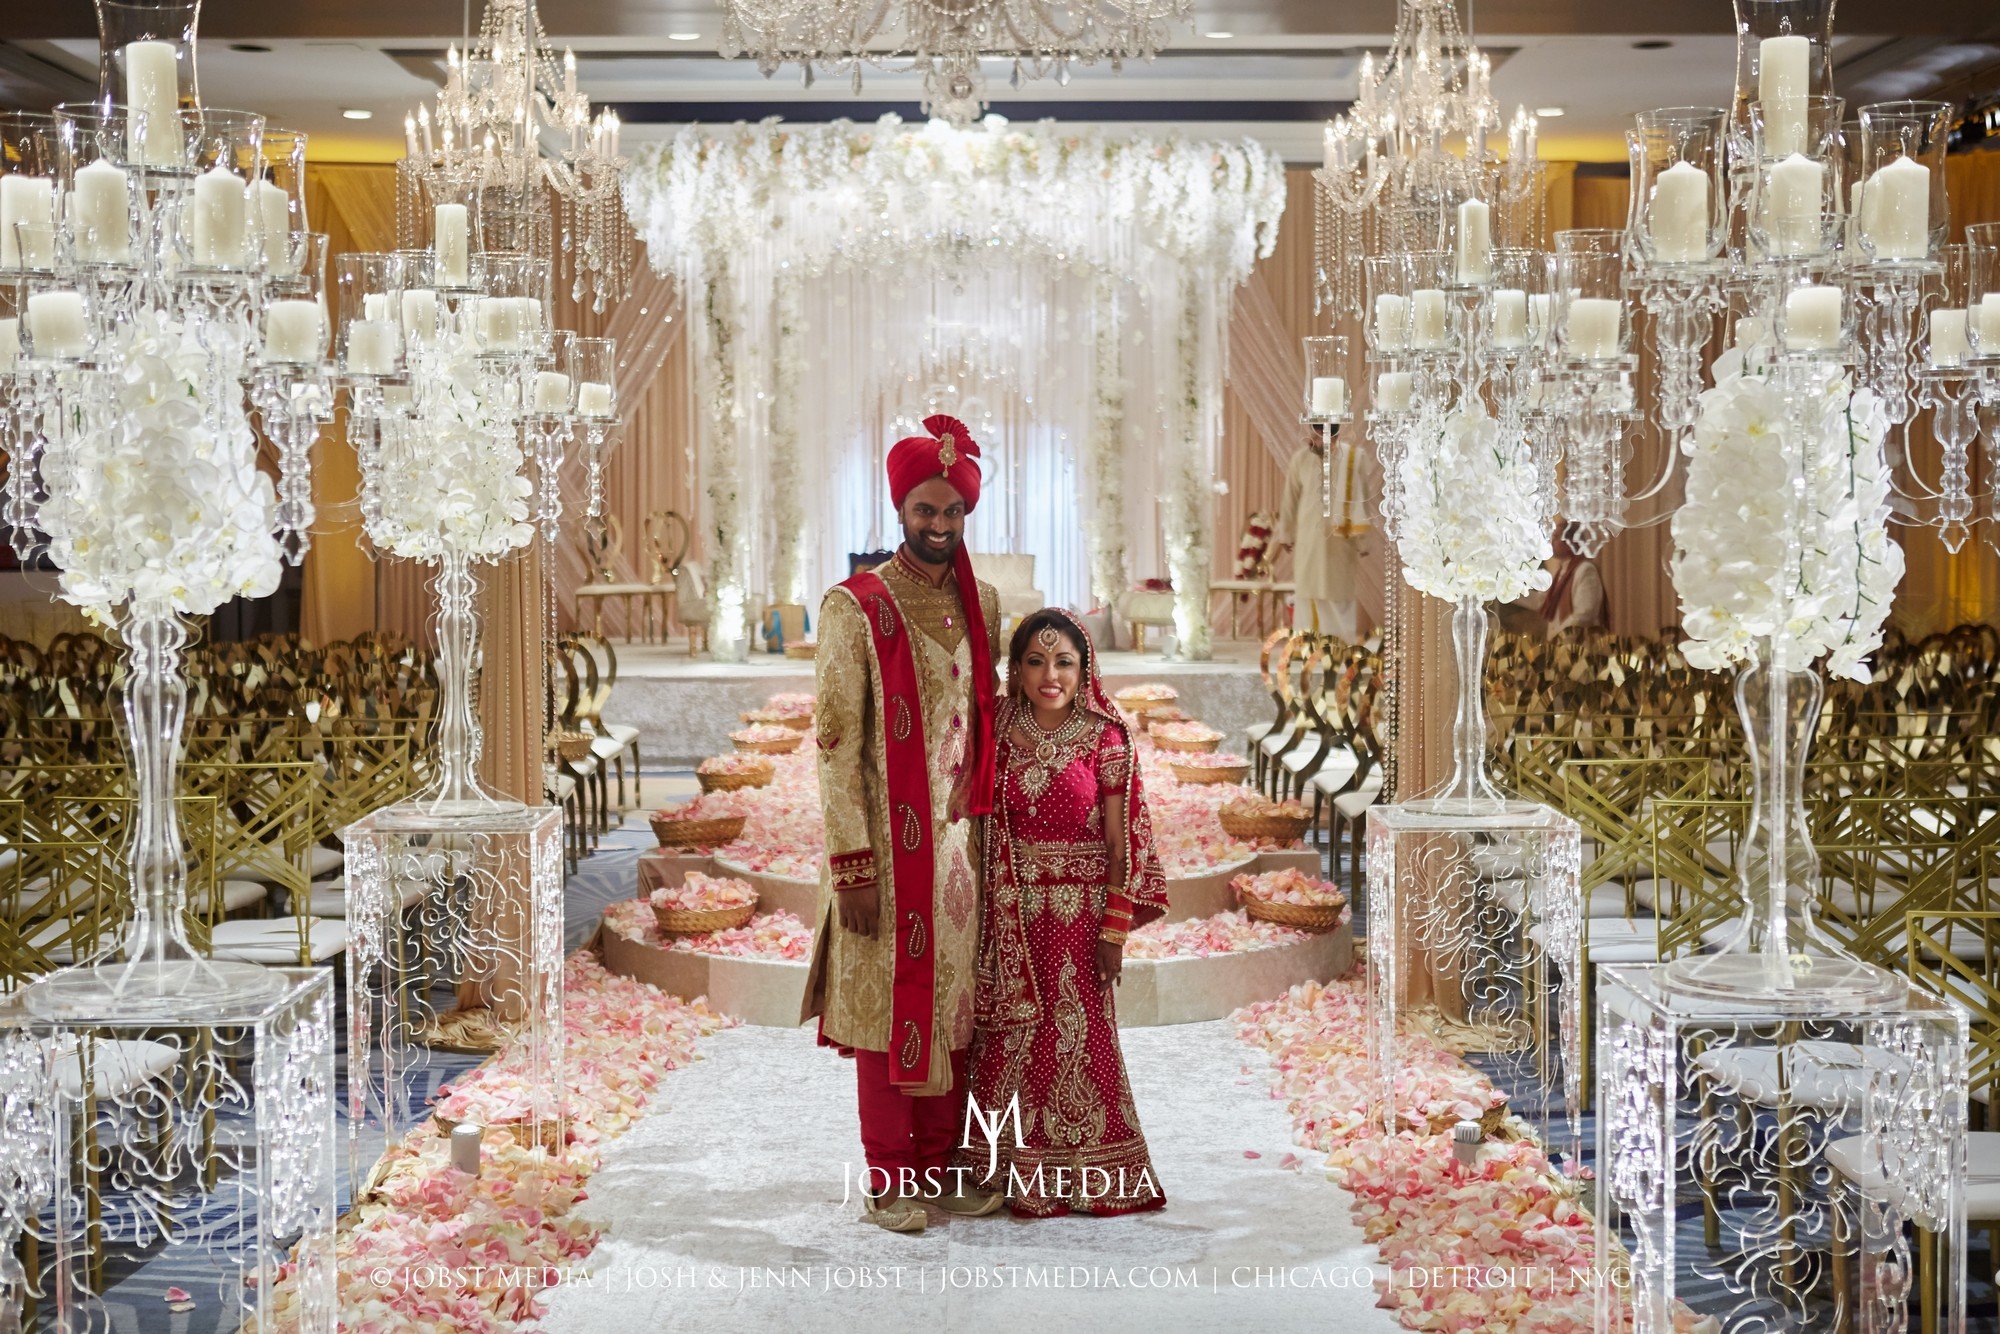 Picture of Hindu God Venkatachalapathy and Godess Alamelu in a Wedding  Stage Decor Stock Photo - Image of lighting, palace: 273400554